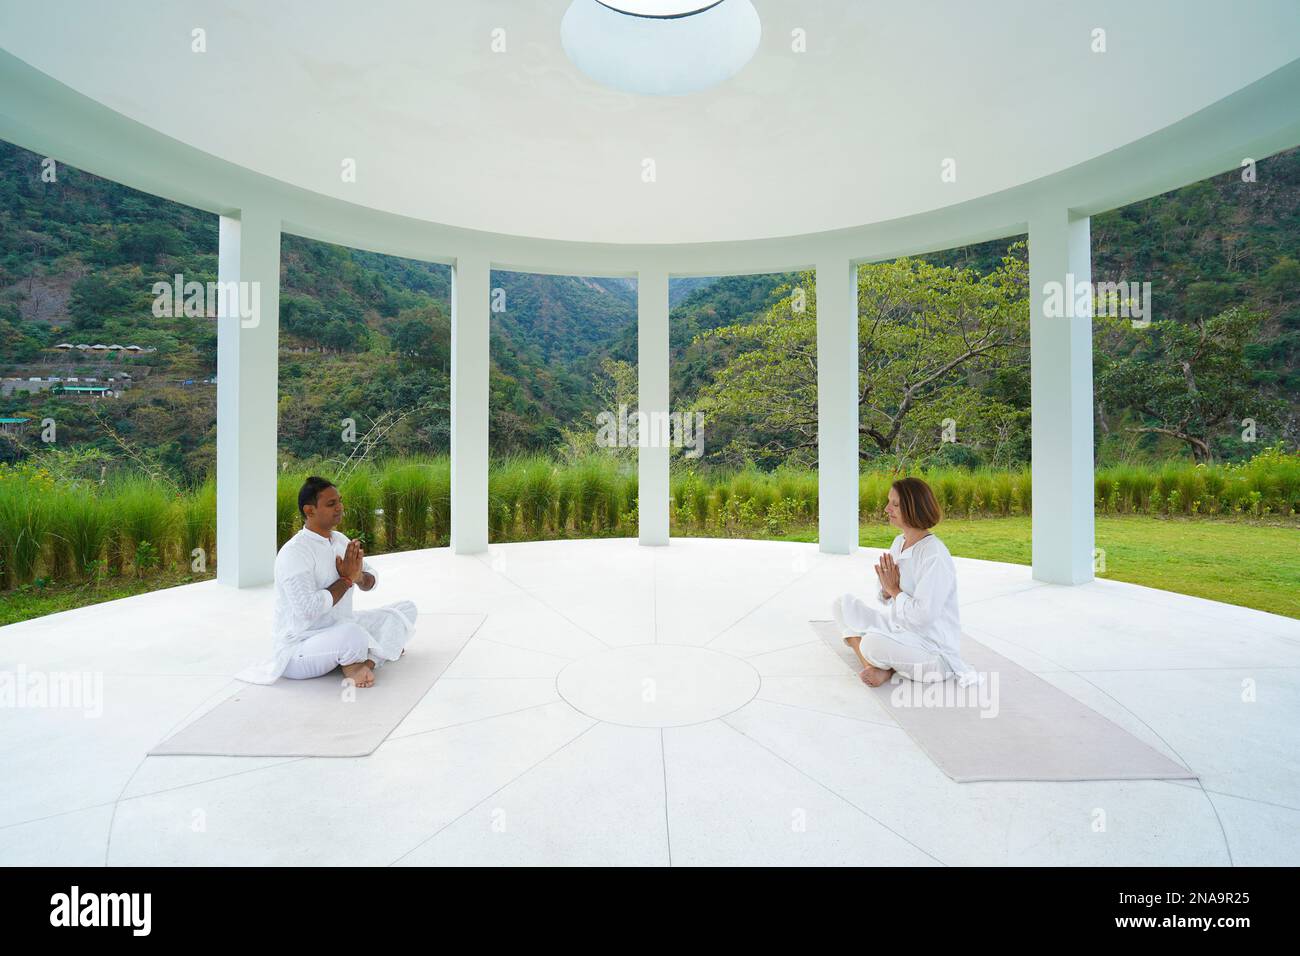 Yoga Class at Taj Risikesh Hotel in the Foothills of the Himalayas between Rishikesh and Devprayag in the Ganges Valley, Uttarakhand, India. Stock Photo